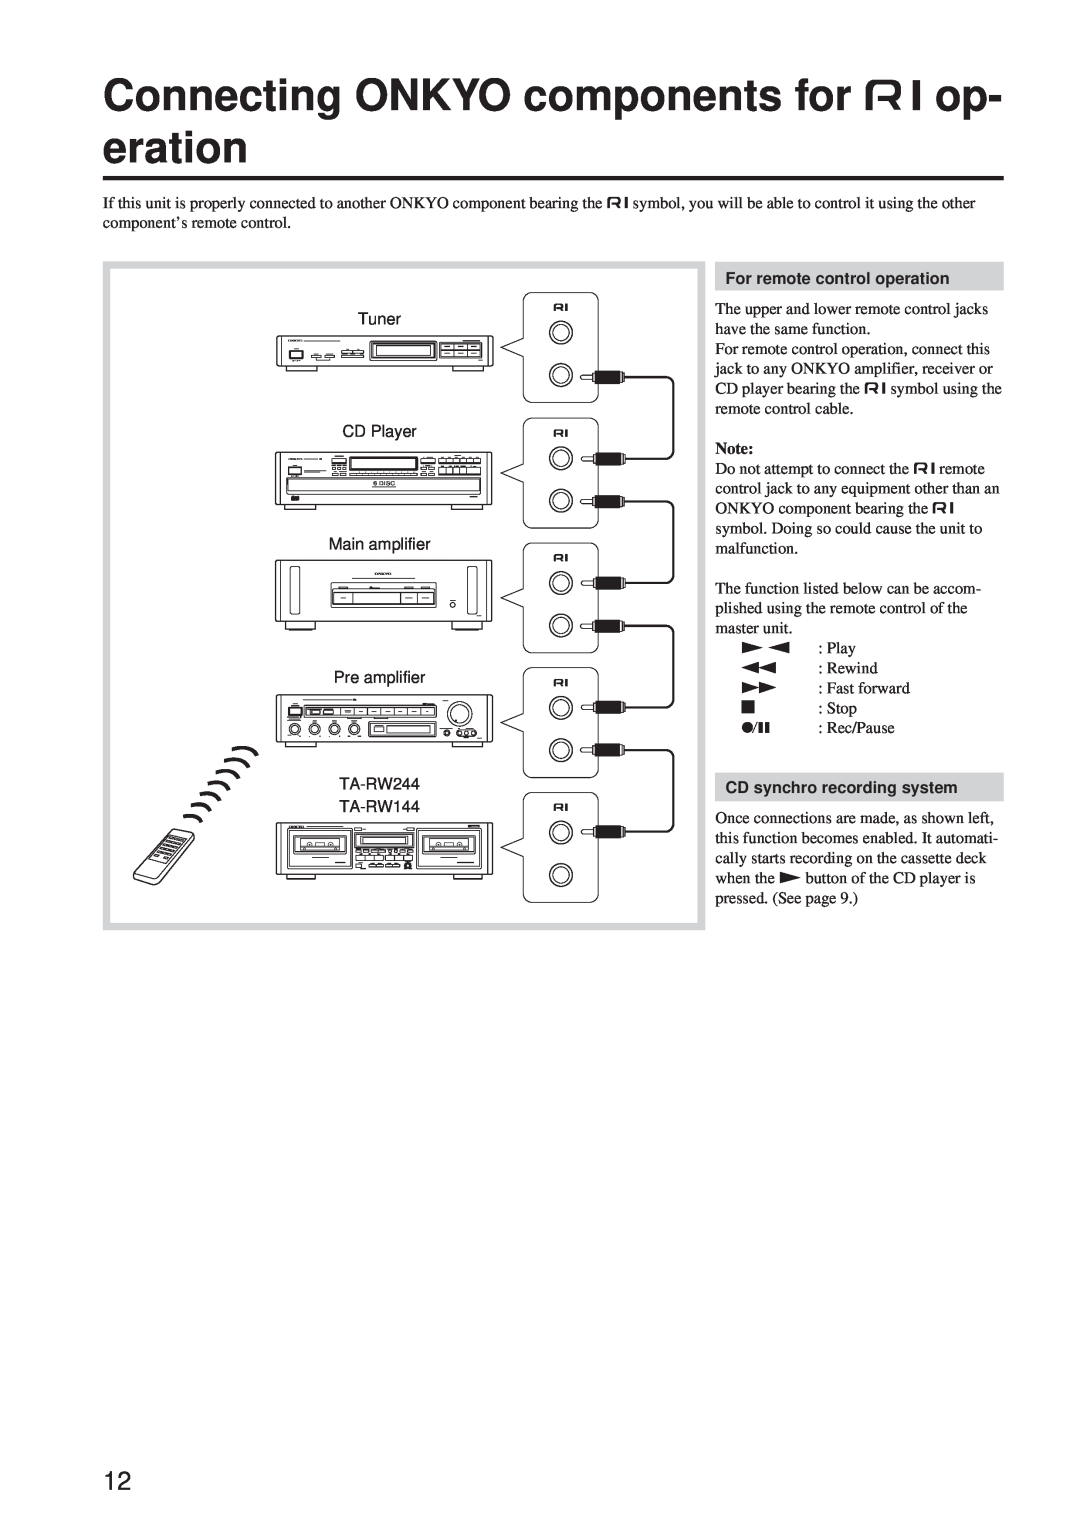 Onkyo TA-RW244/144 instruction manual Connecting ONKYO components for z op- eration, For remote control operation 